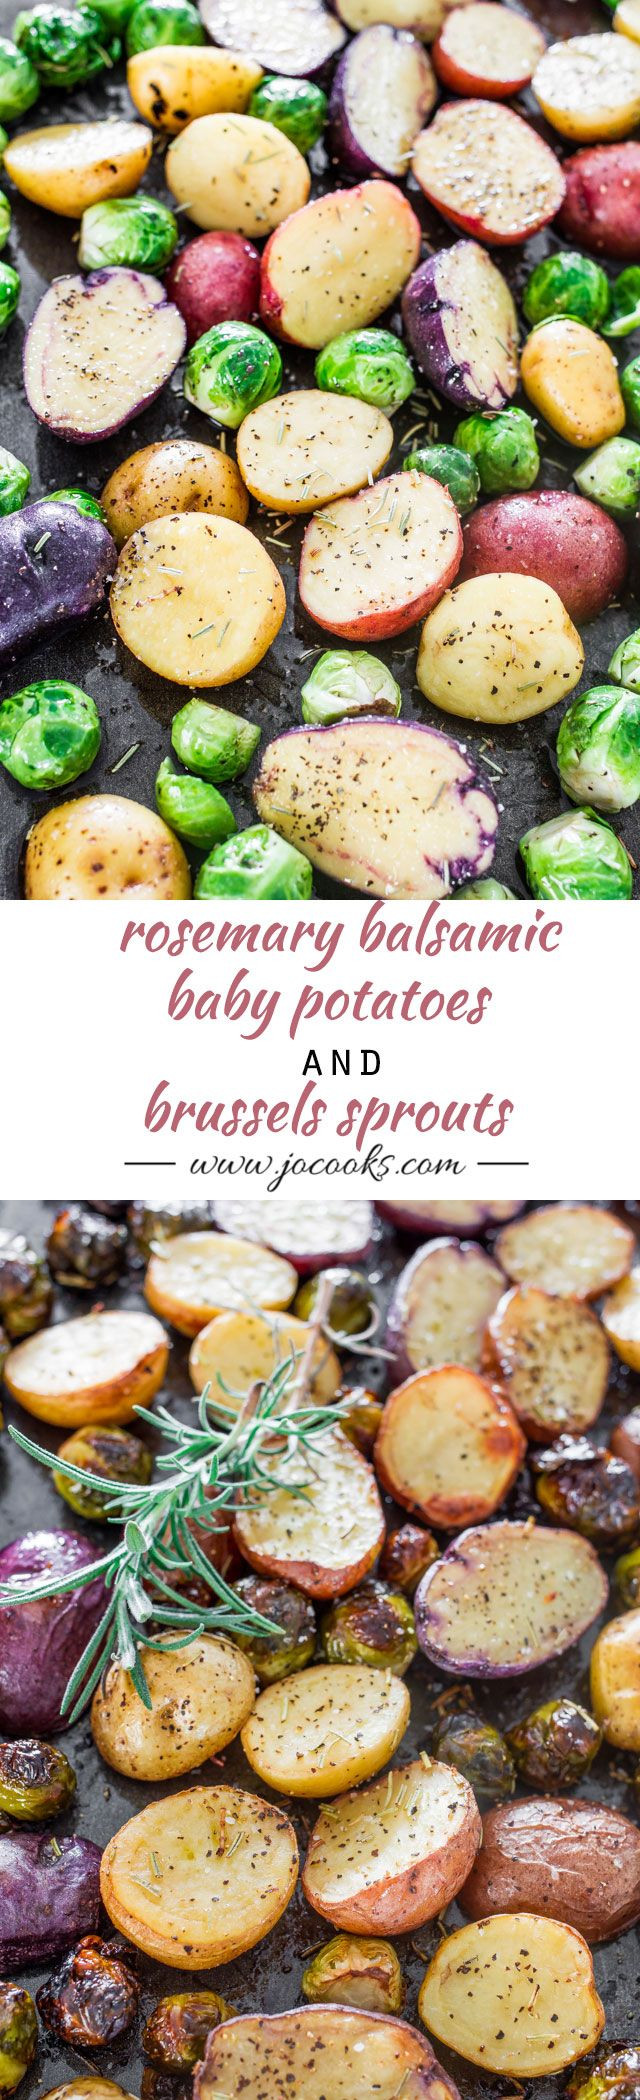 Baby Brussel Sprouts Recipes
 Rosemary Balsamic Baby Potatoes and Brussels Sprouts